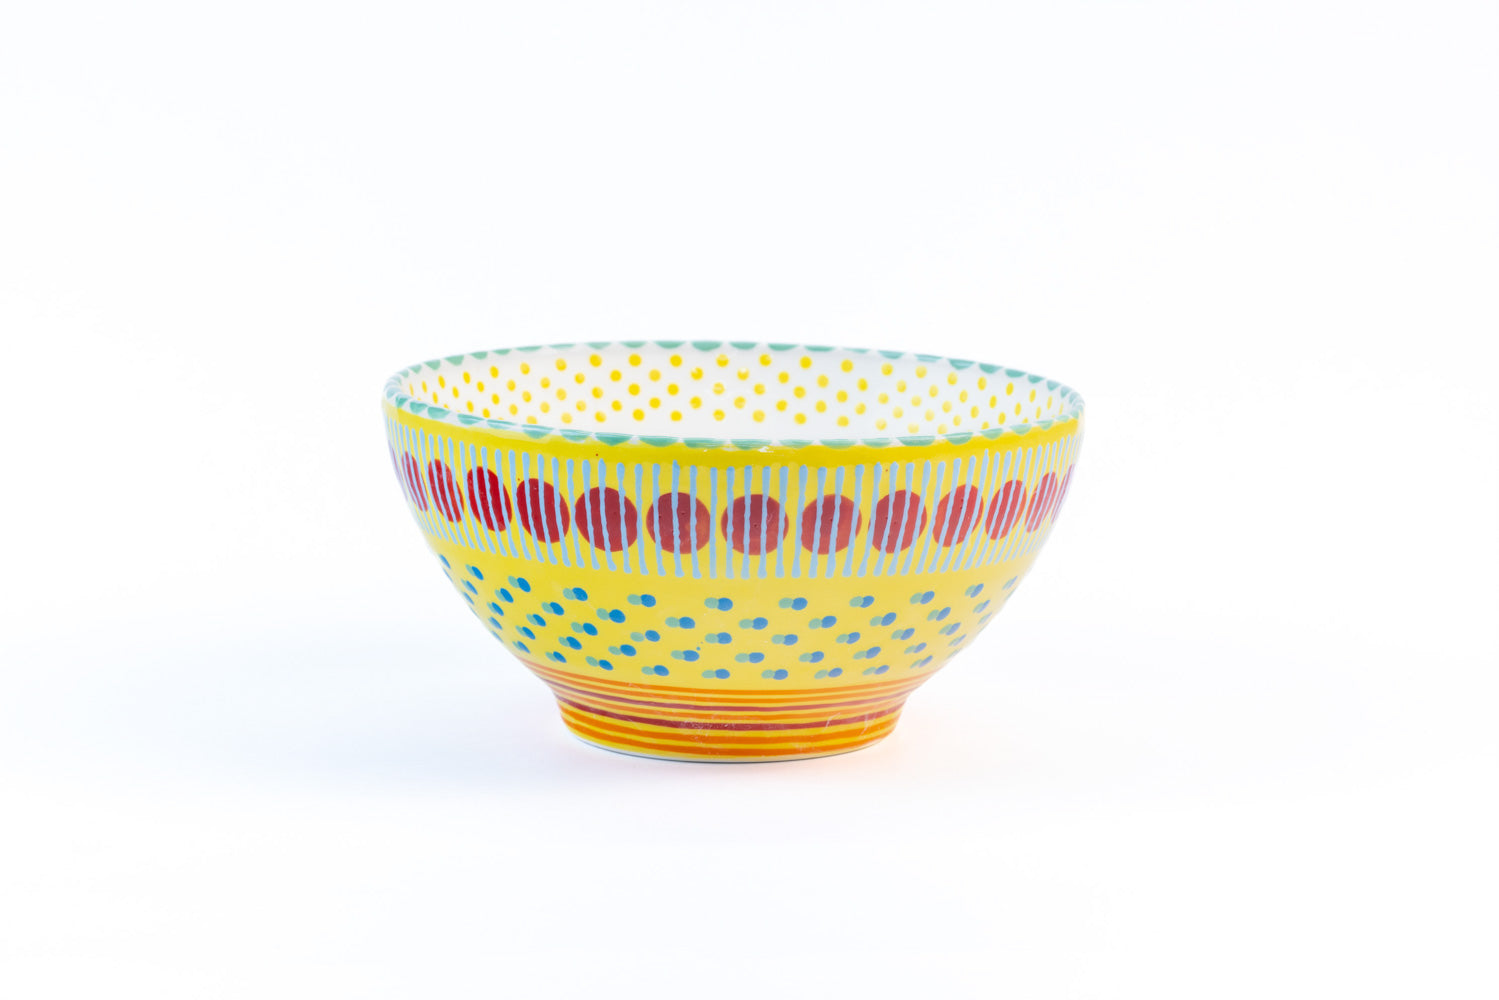 Ceramic serving bowl with base color of Yellow. Dots & Stripes painted on top in fun colors of turquoise, orange, green  & red. White inside the bowl.